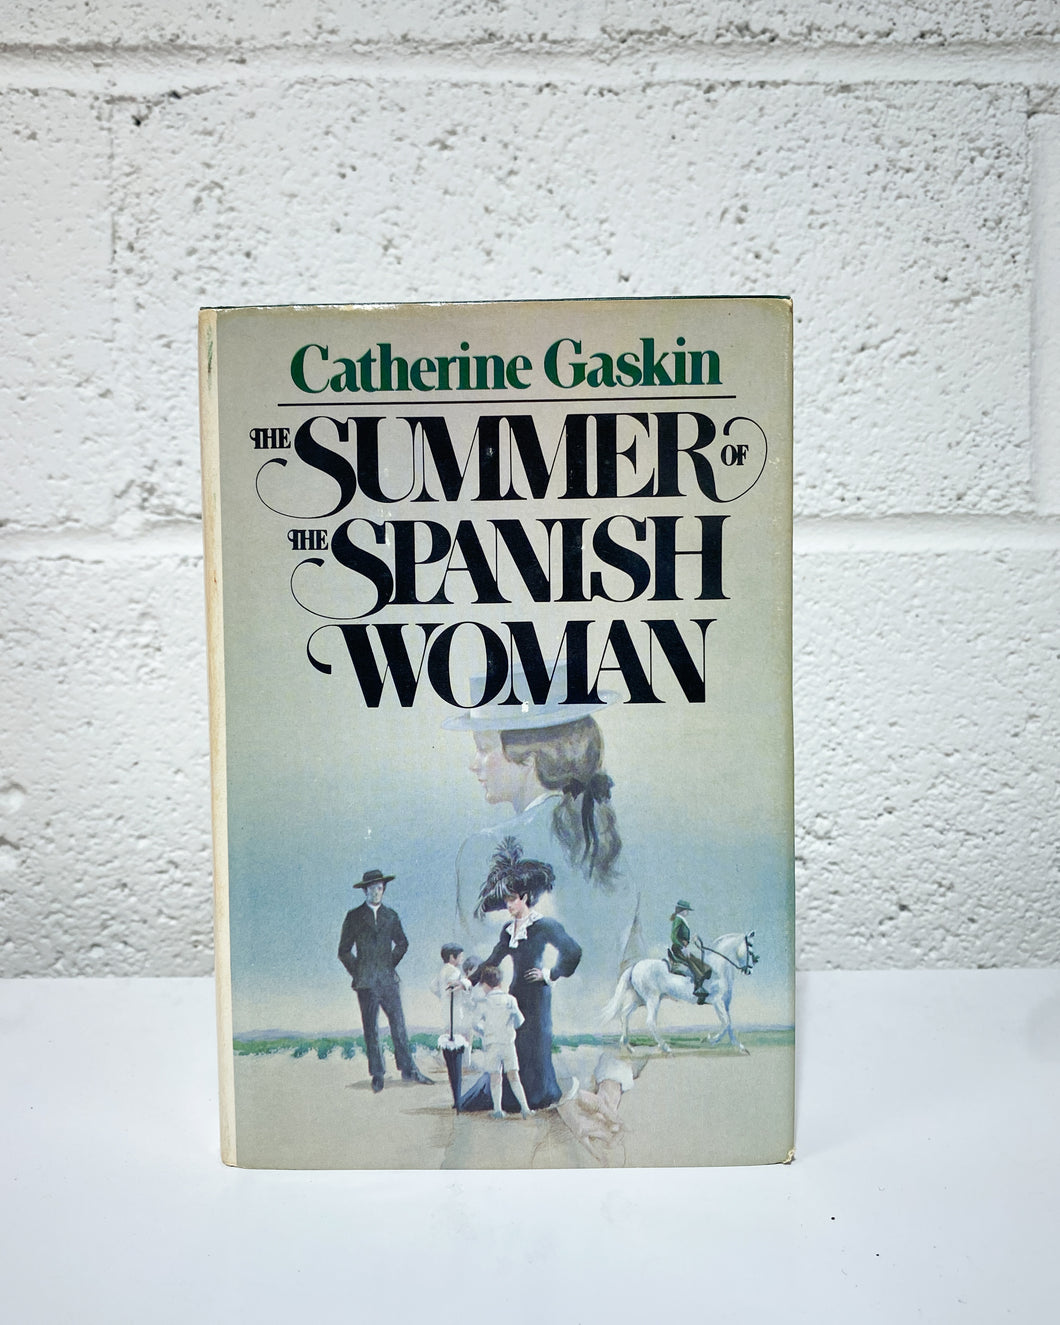 The Summer of The Spanish Woman by Catherine Gaskin